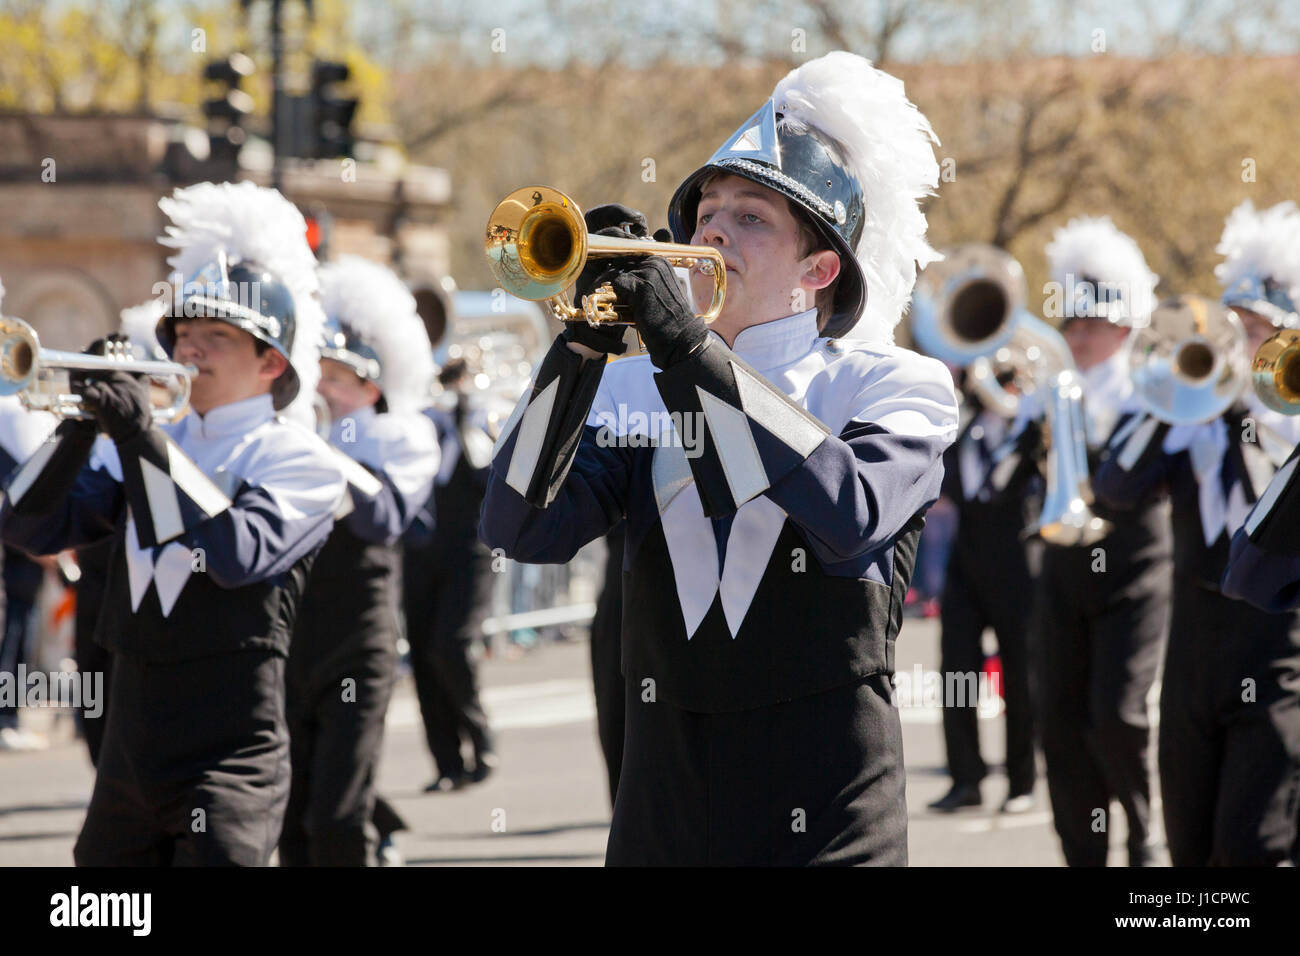 High school marching band participating in street parade - USA Stock Photo